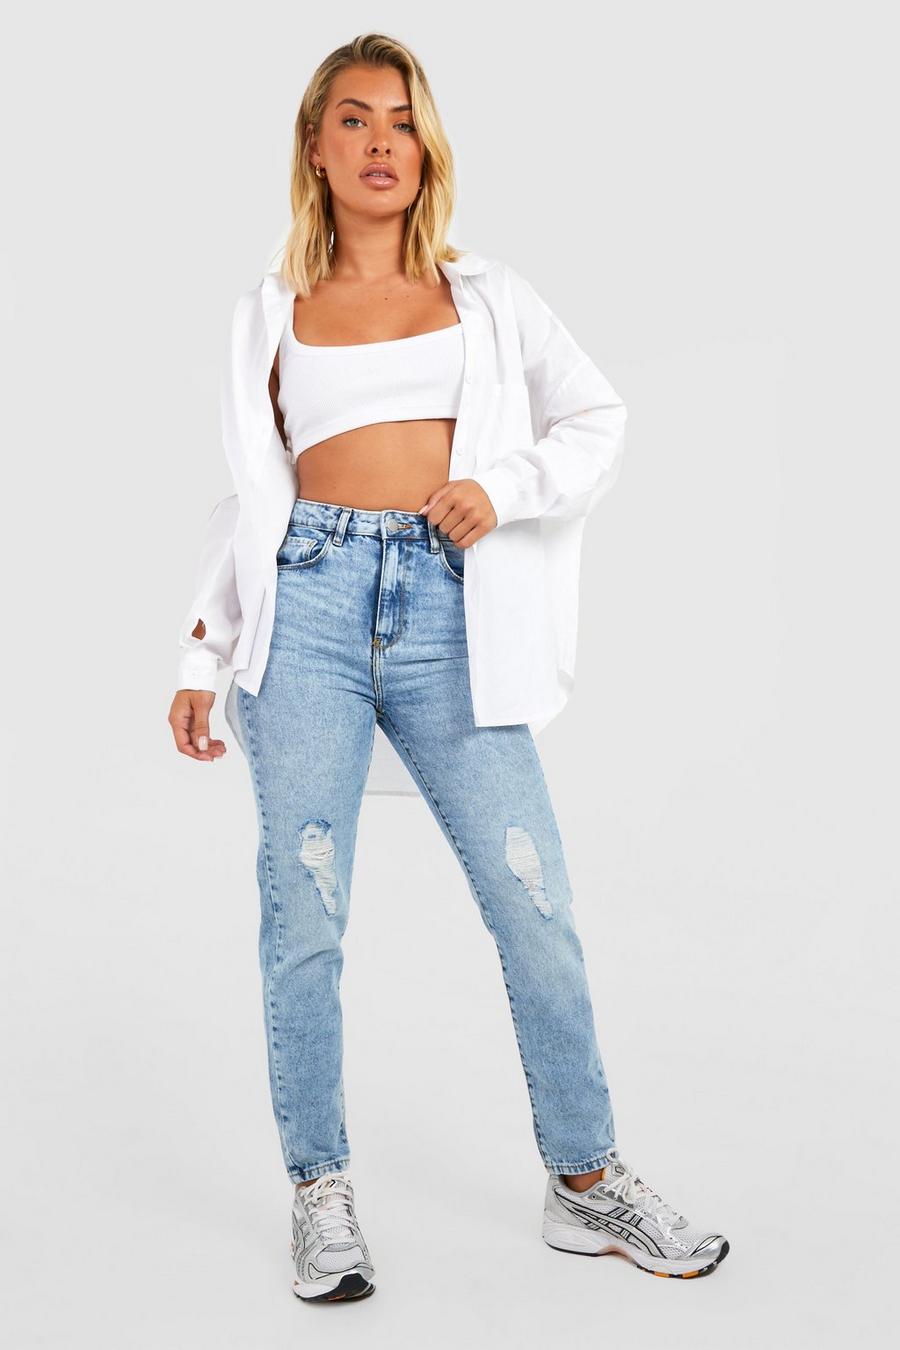 Blue Clothing | Blue Outfits & Accessories | boohoo UK